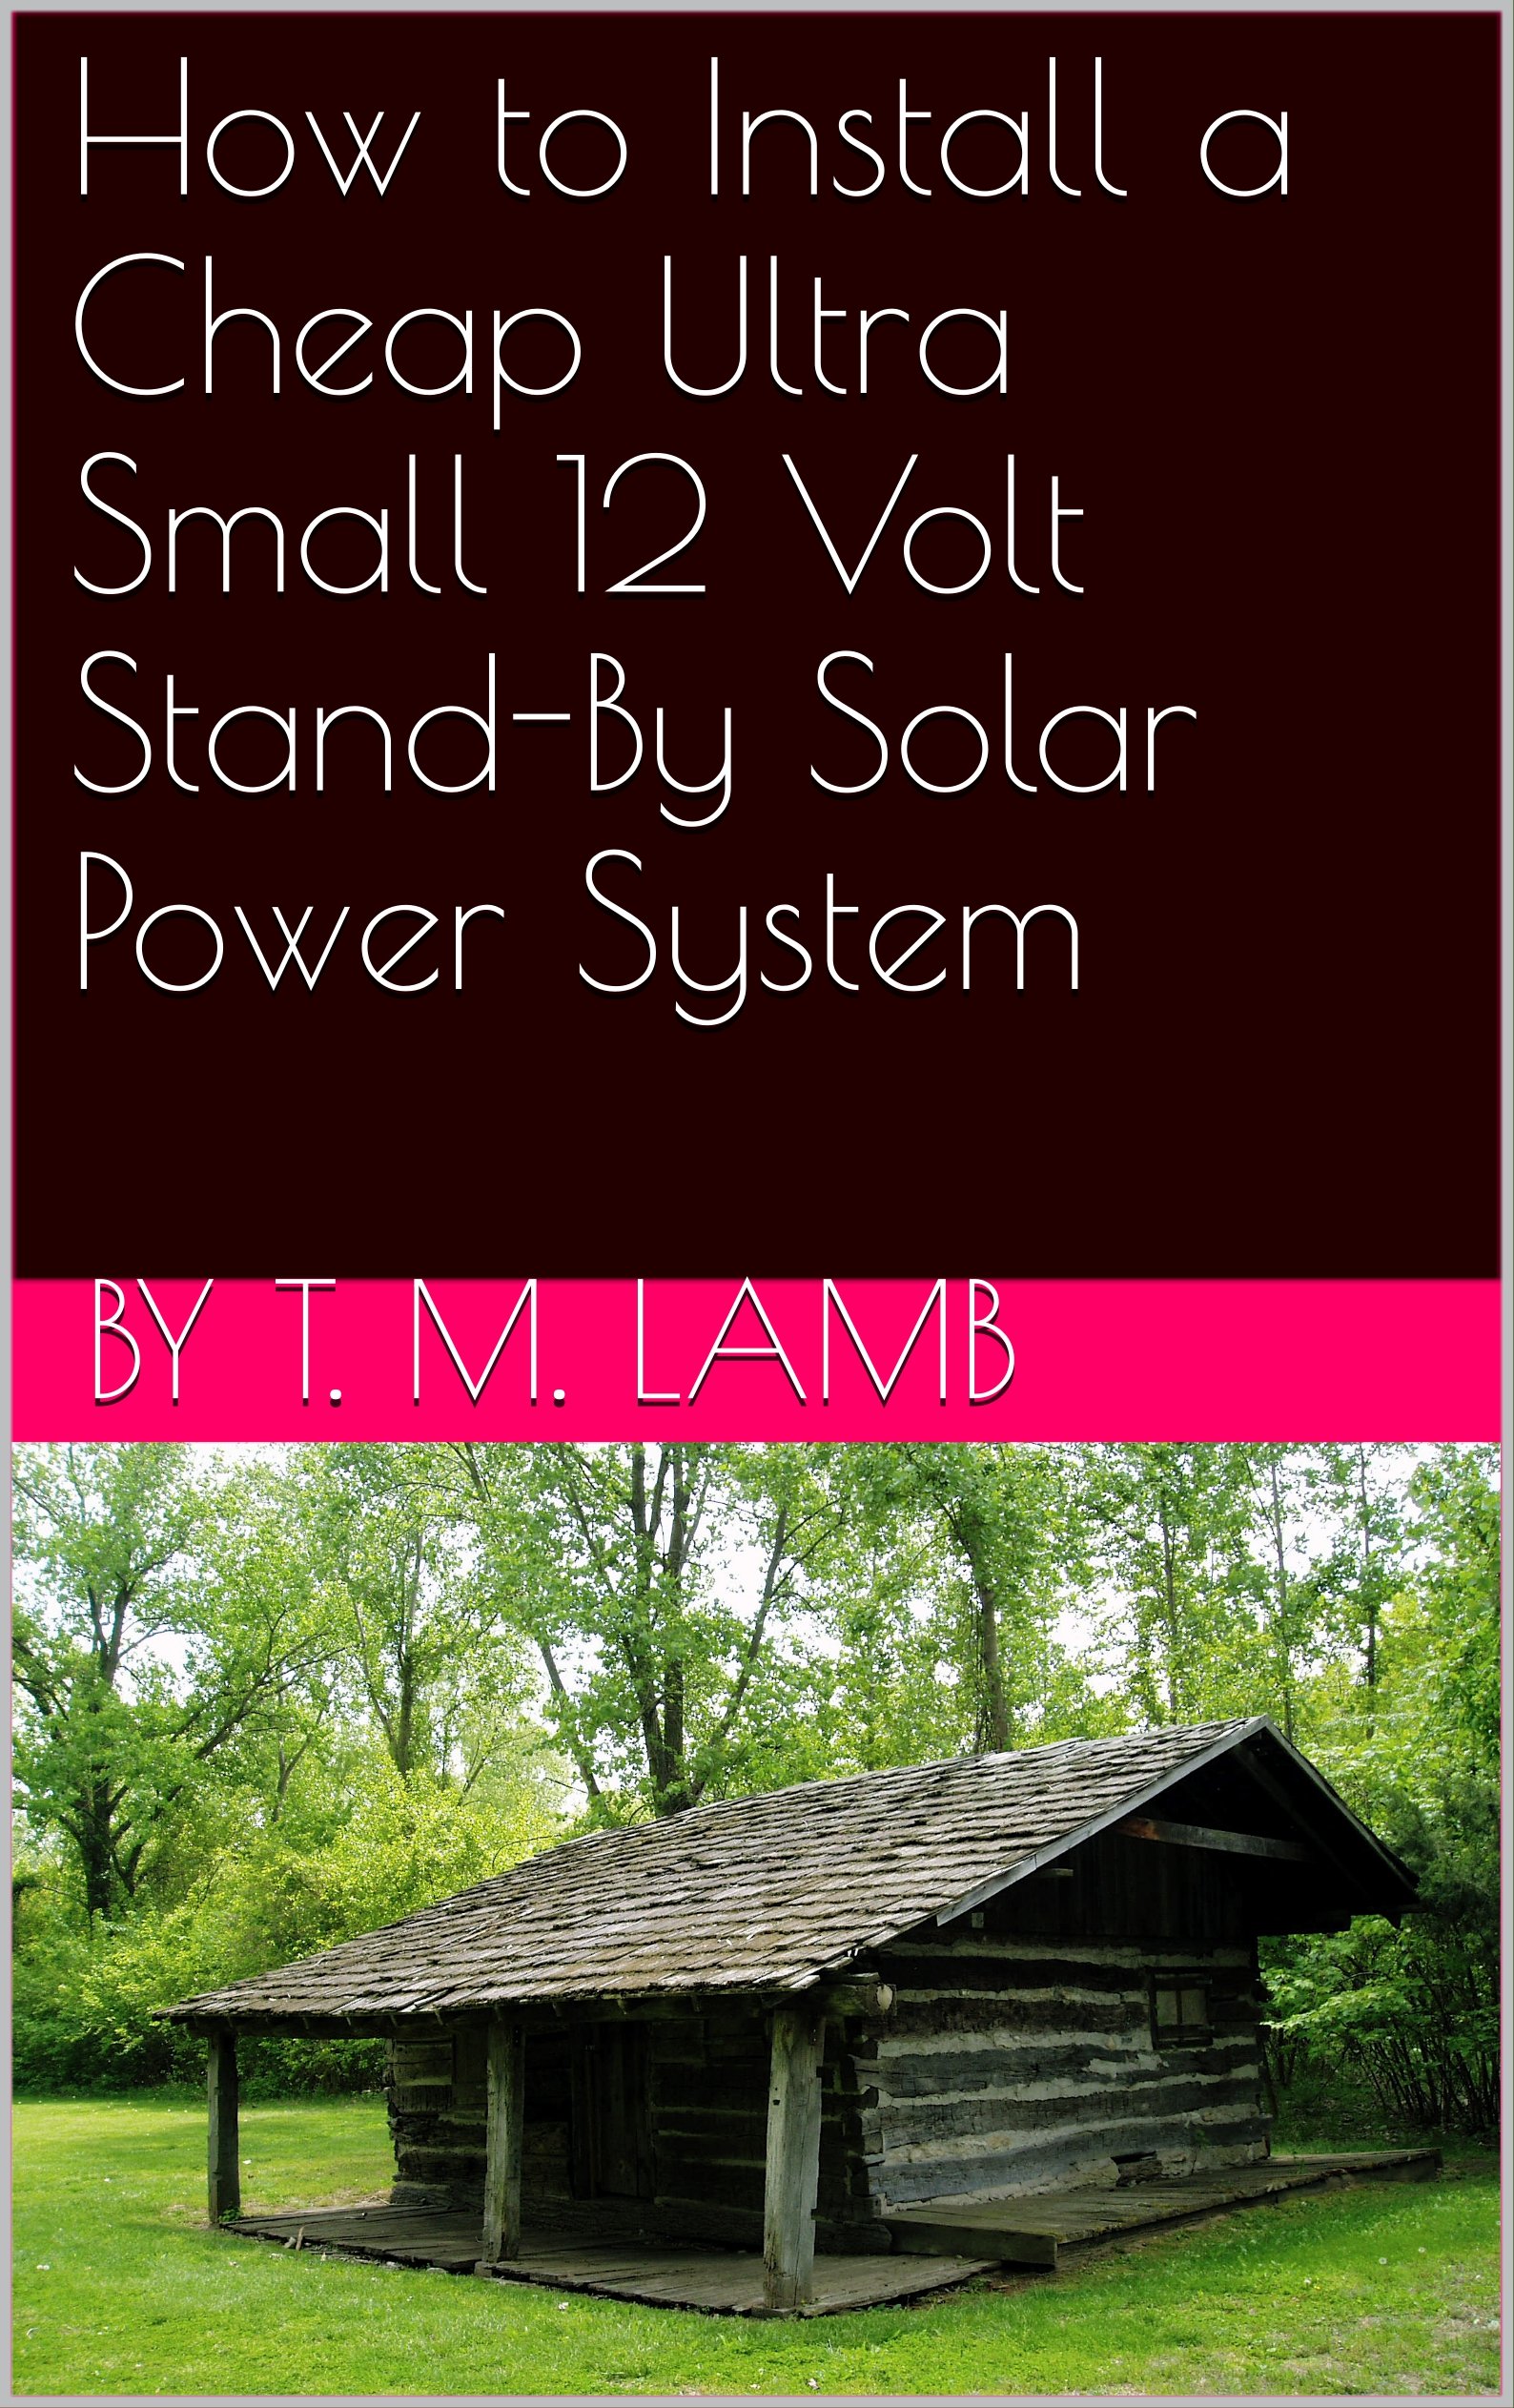 How to Install a Cheap Ultra Small 12 Volt Stand-By Solar Power System